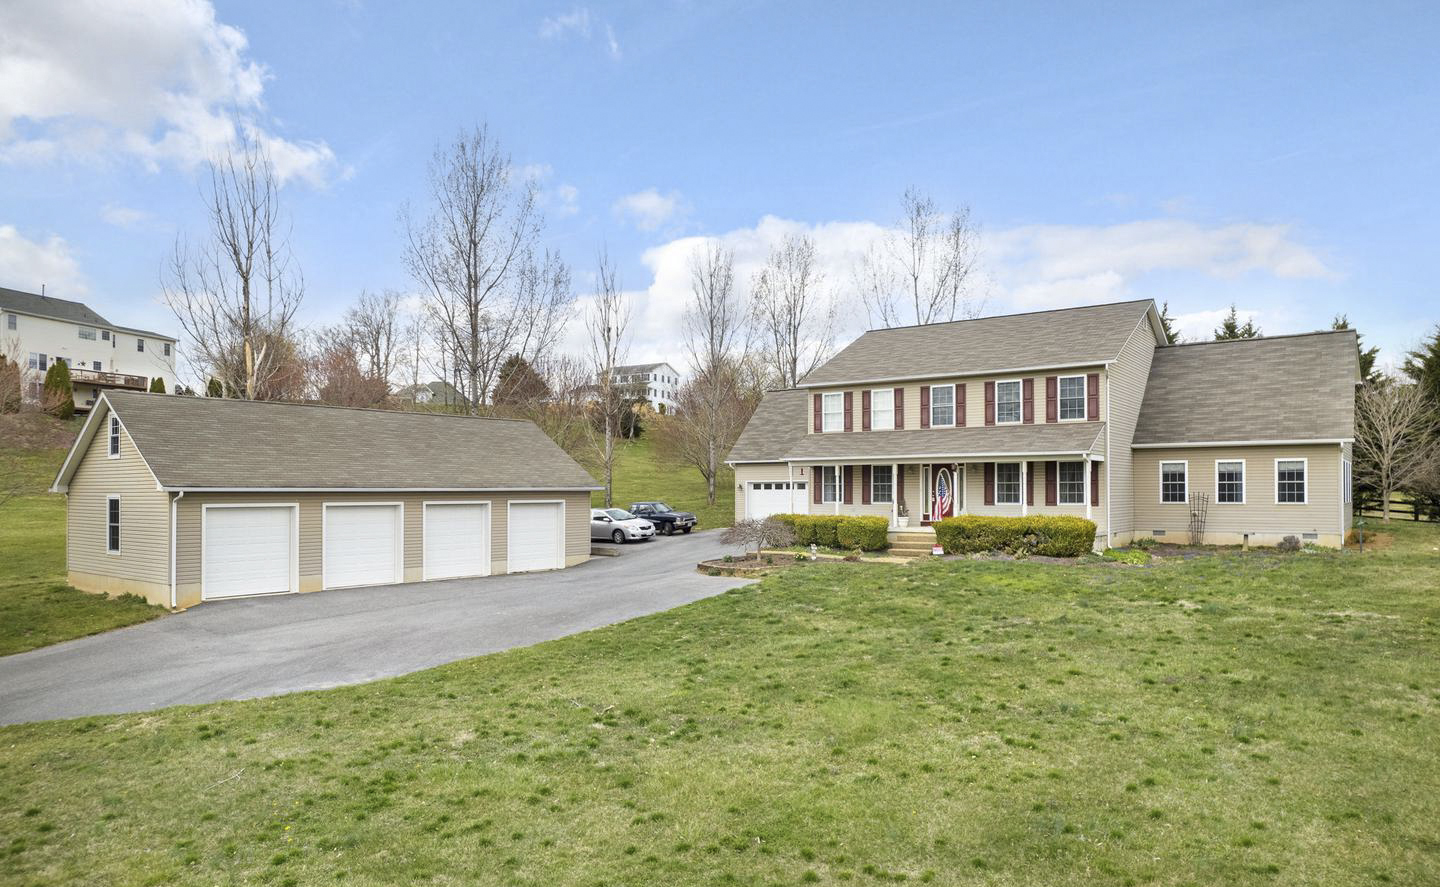 120 Meeting House Dr | Winchester, VA